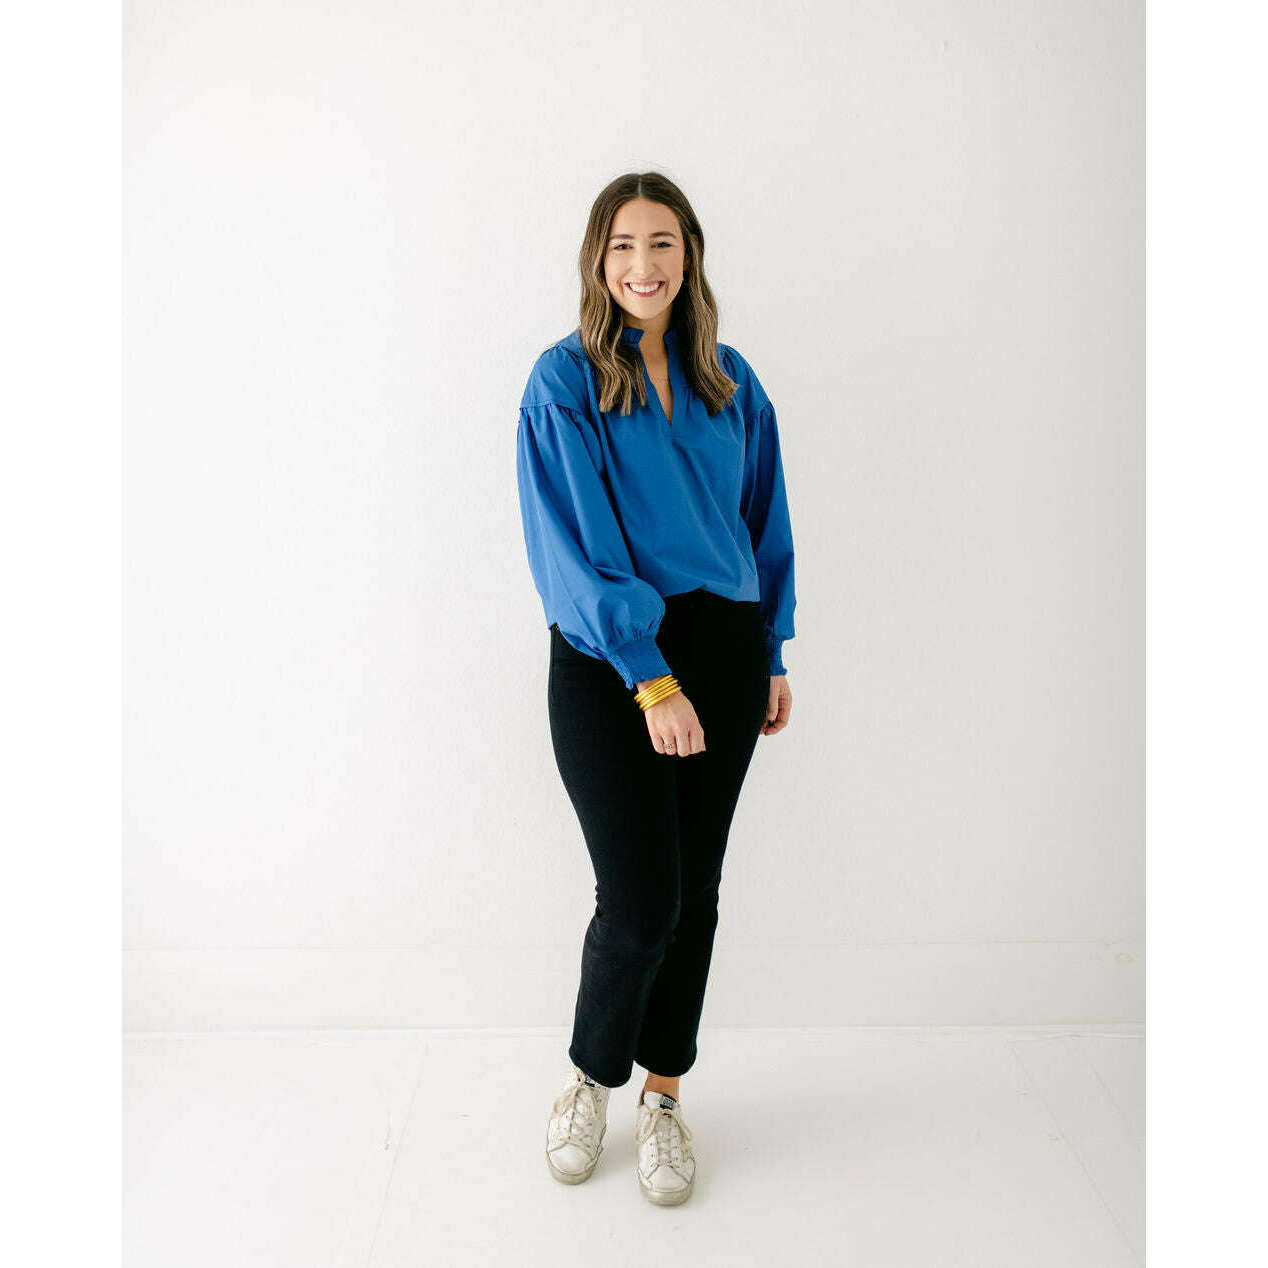 8.28 Boutique:Jade by Melody Tam,Jade Royal Blue Trimmed Top,Top